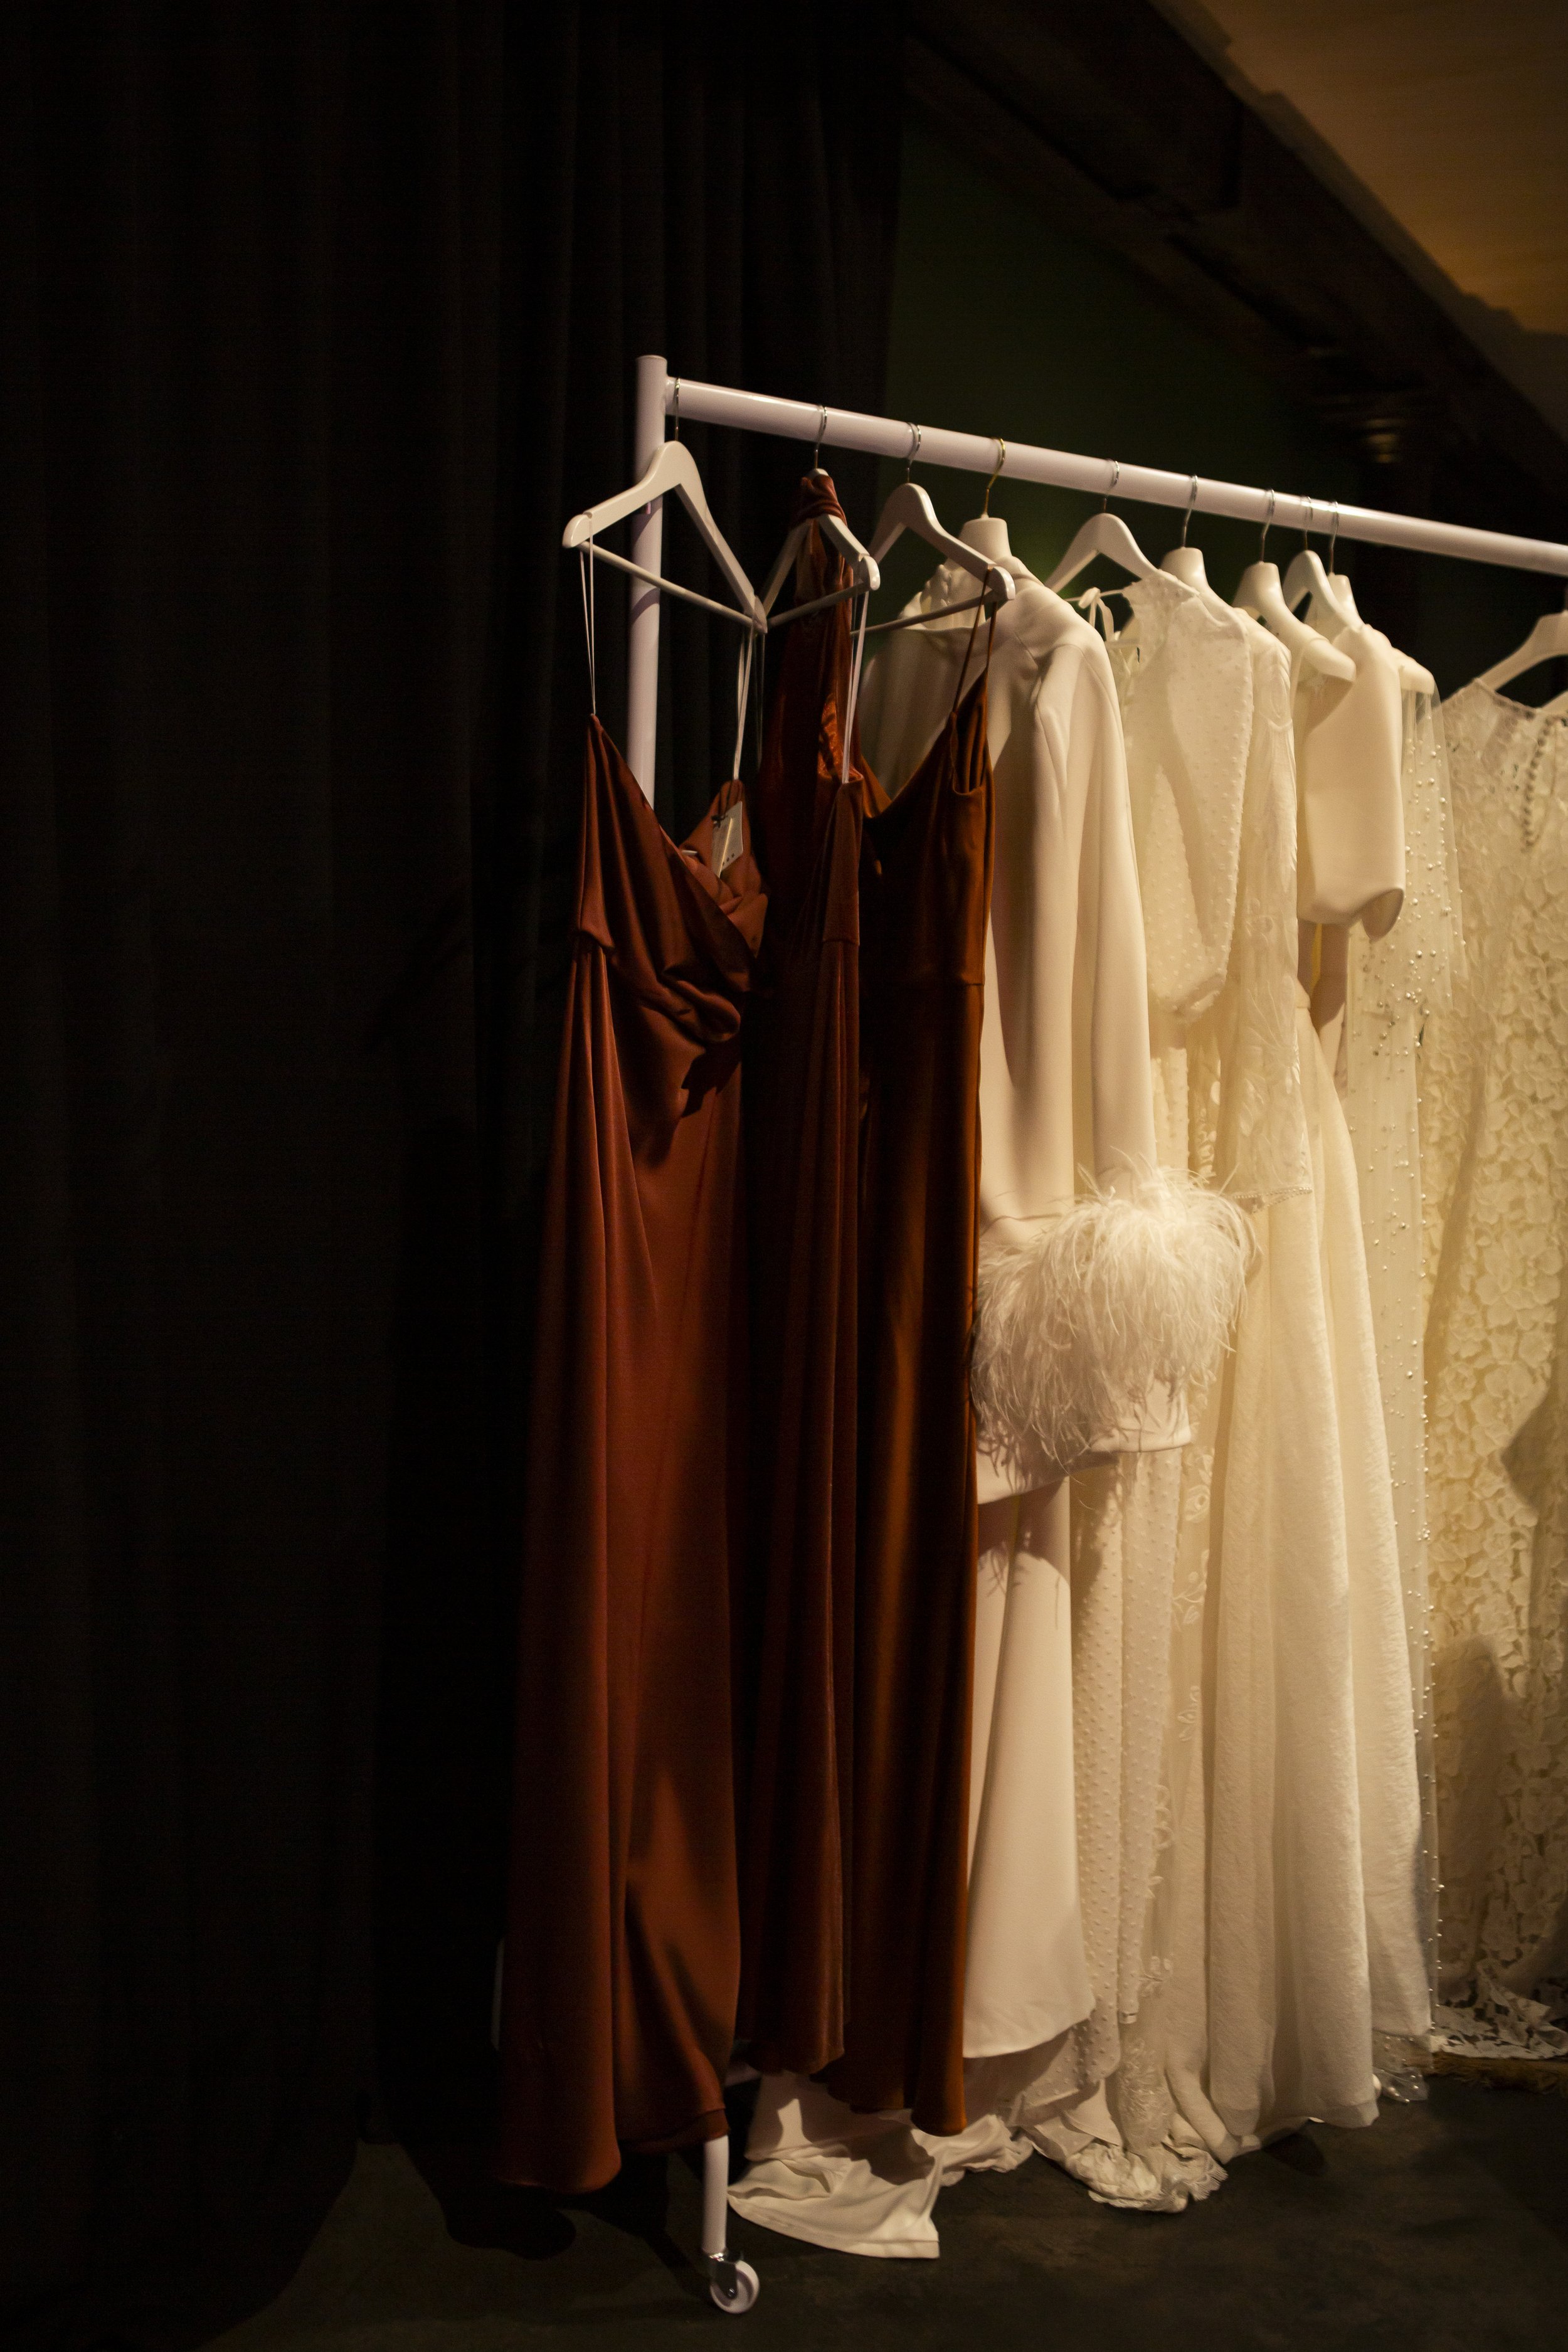  Individual, non traditional wedding and bridesmaid dresses. The brown and cream dresses in various different styles and fabrics look stunning on the rail.  